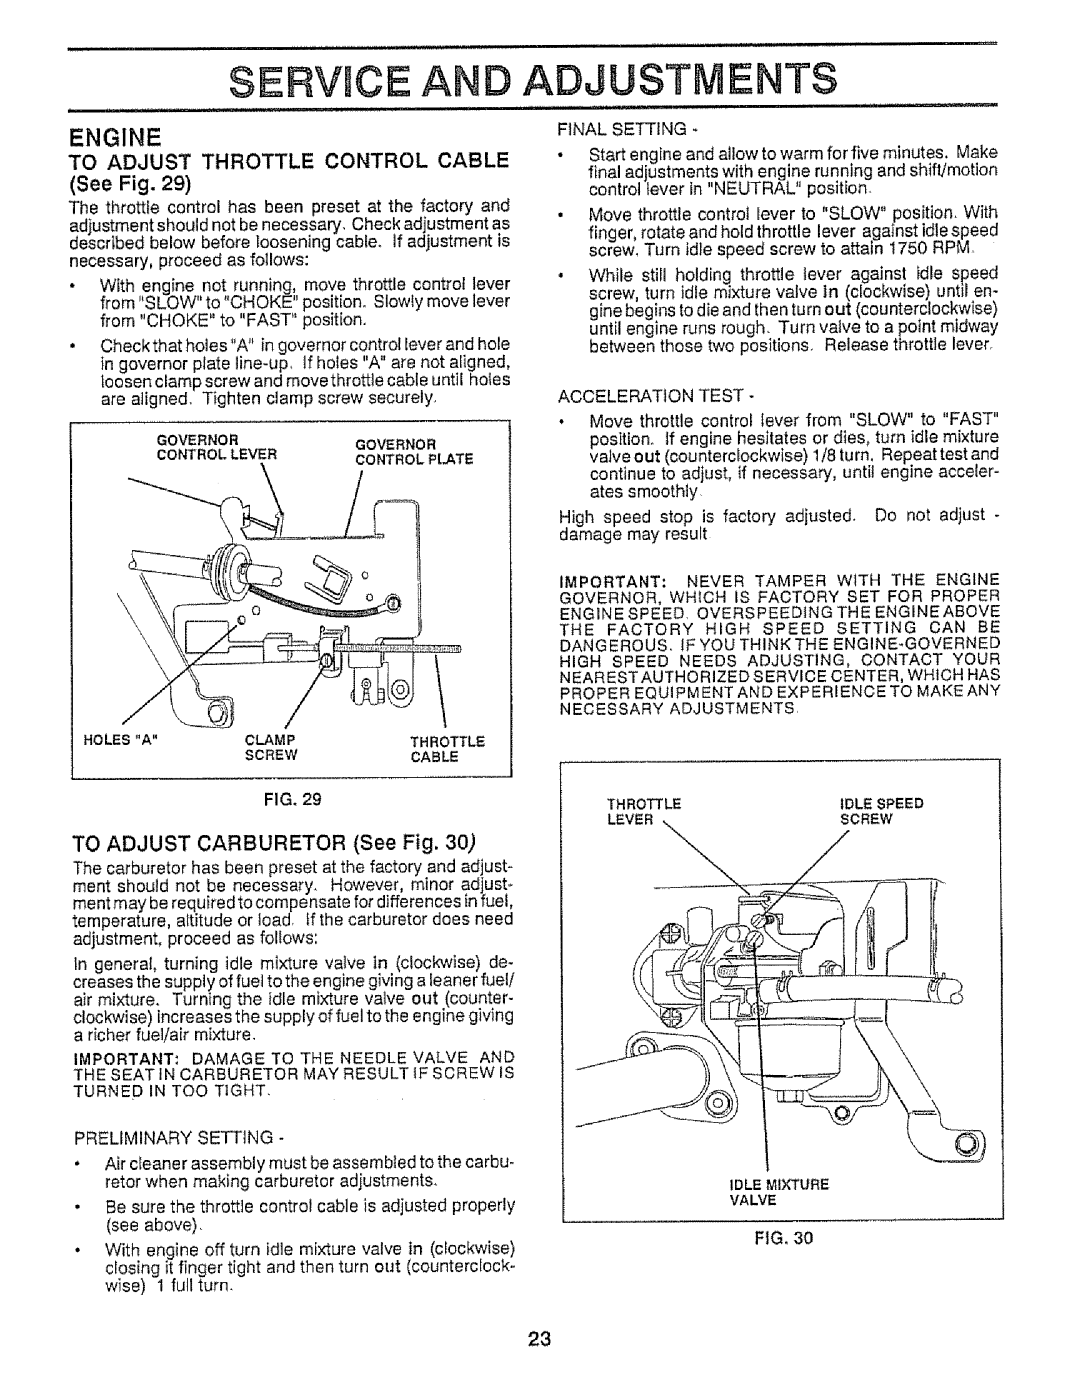 Craftsman 917.255561 owner manual Service An Adjustments, Engine, TO ADJUST THROTTLE CONTROL CABLE See Fig 